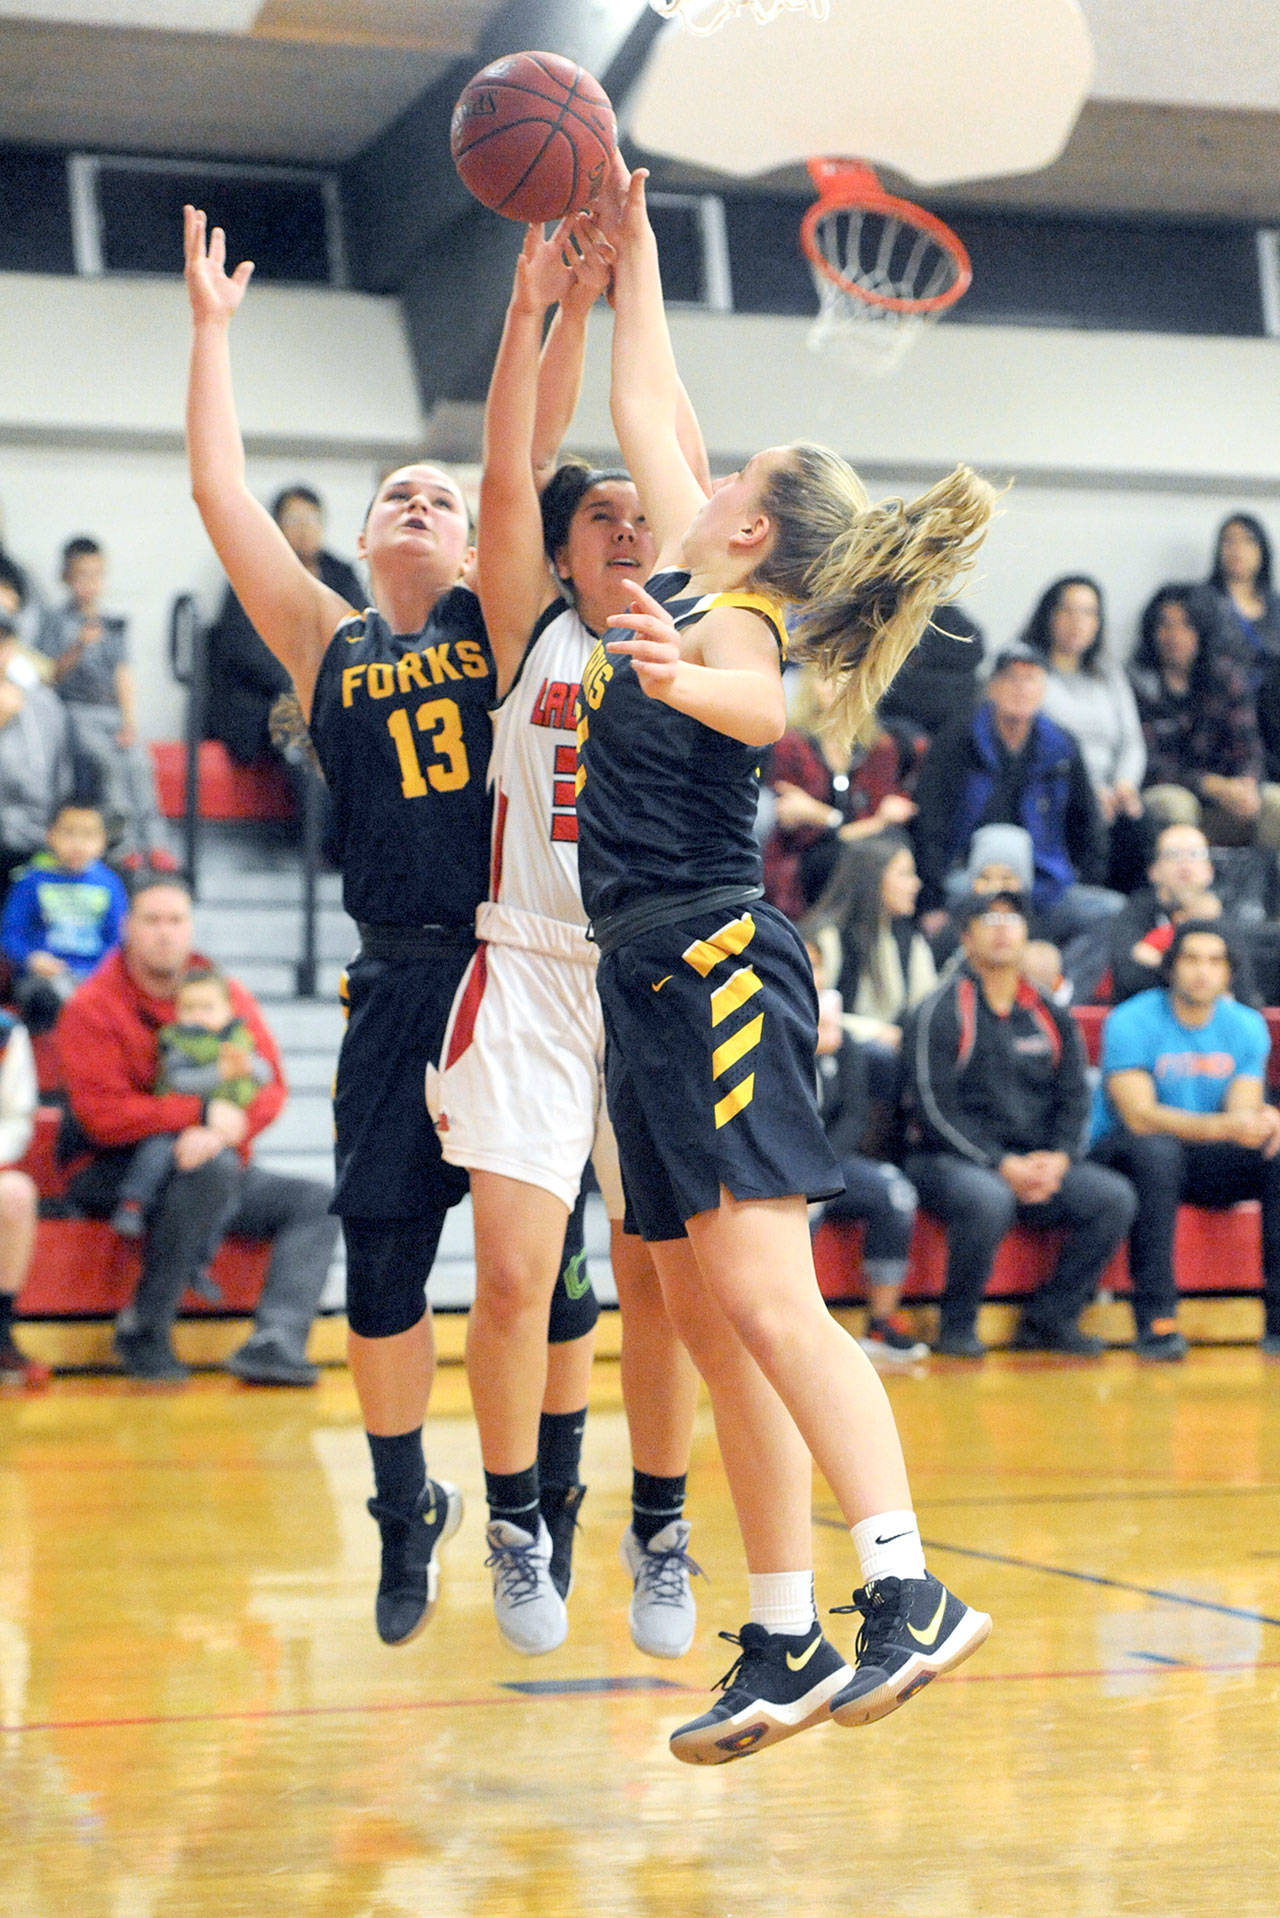 Lonnie Archibald/for Peninsula Daily News Forks’ Rian Peters (13) and Chloe Leverington compete with Neah Bay’s Ruth Moss (32) for the rebound during Neah Bay’s 53-39 win.